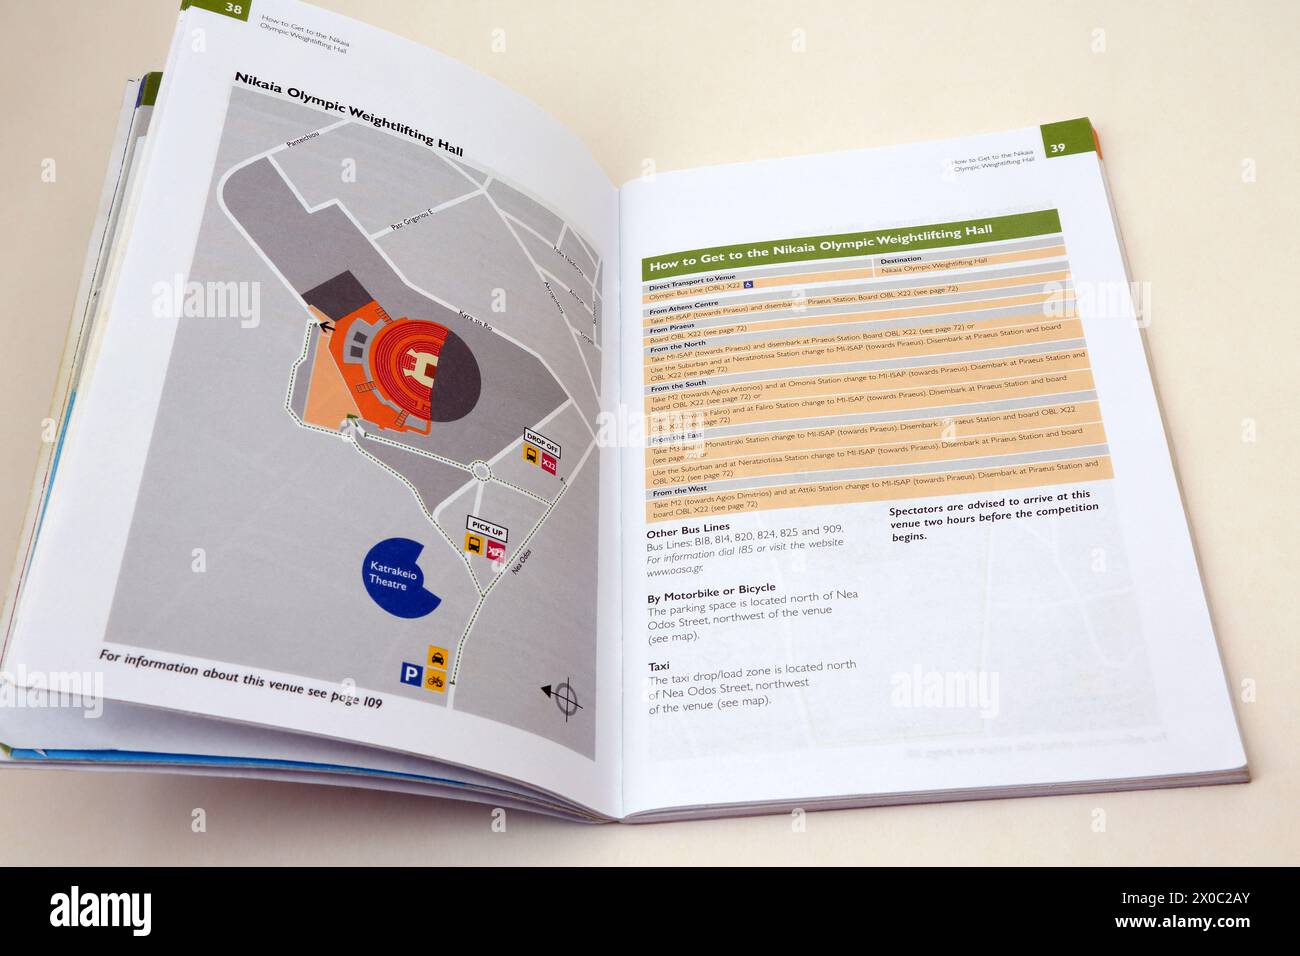 Stadion Official Spectators guide to  Summer Olympics Athens 2004 Map of Weightlifting Hall Stock Photo